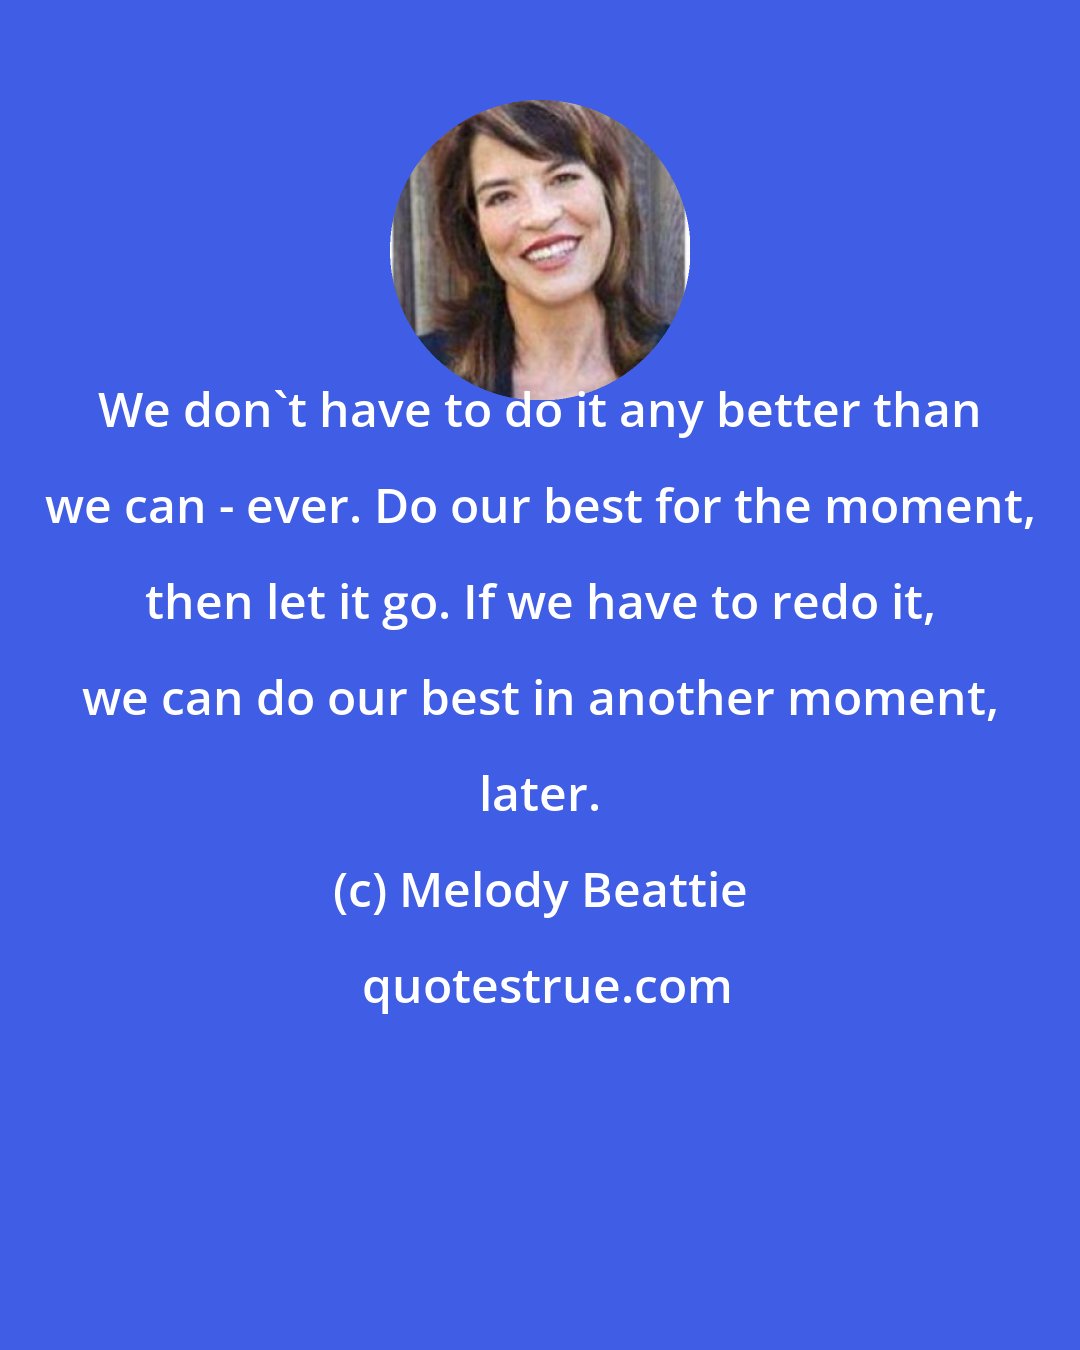 Melody Beattie: We don't have to do it any better than we can - ever. Do our best for the moment, then let it go. If we have to redo it, we can do our best in another moment, later.